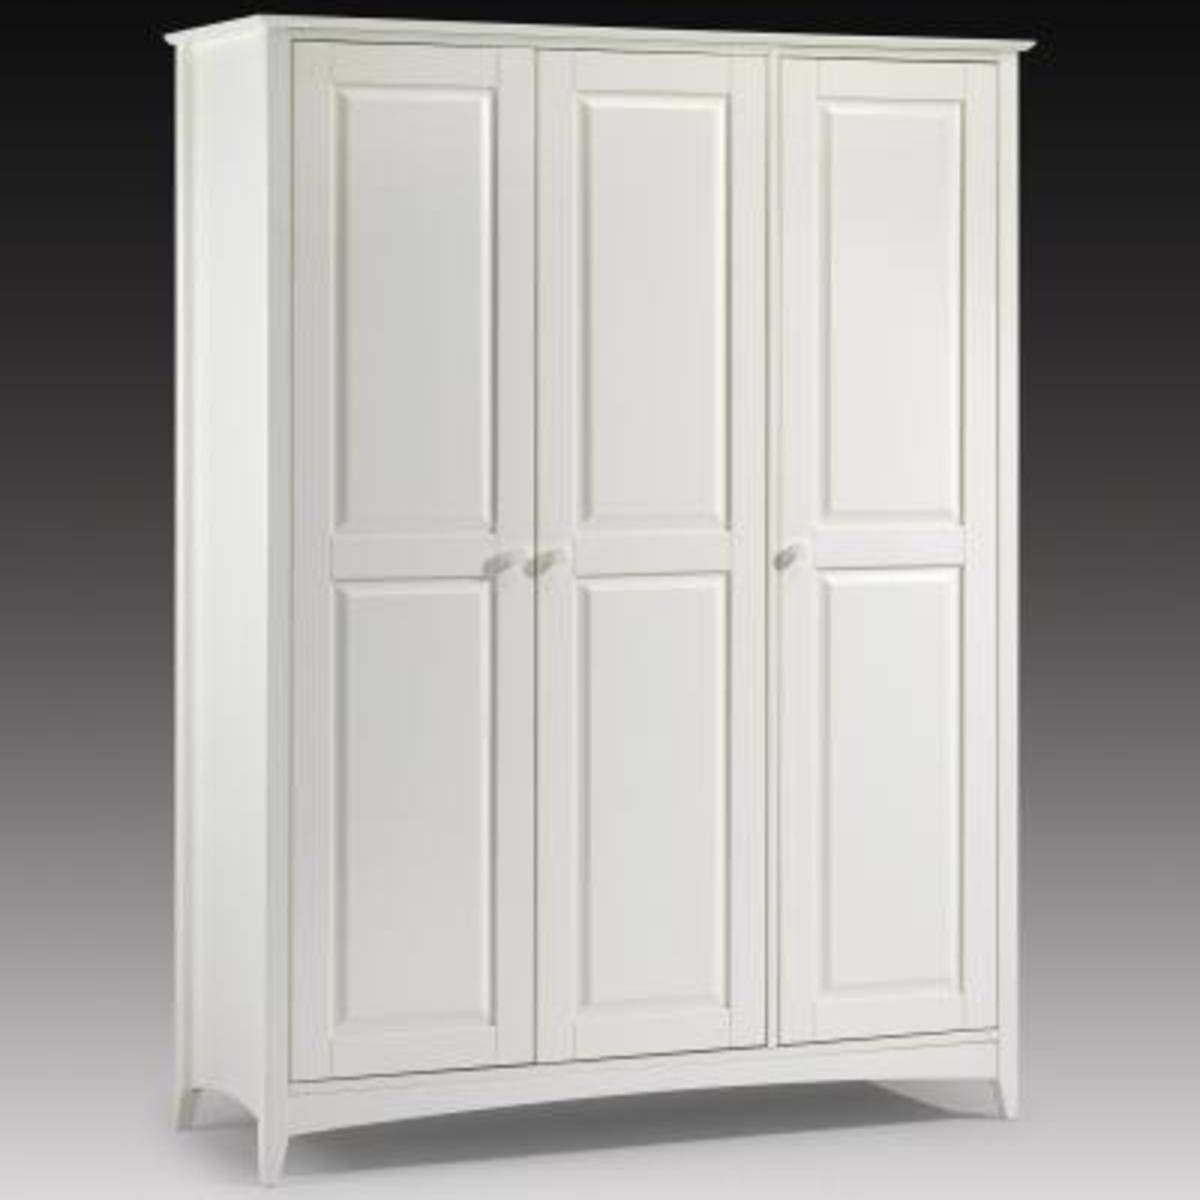 Cheap Wardrobe In White Lacquer |2 Door Wardrobe | Robinsons Beds Regarding White Cheap Wardrobes (View 11 of 15)